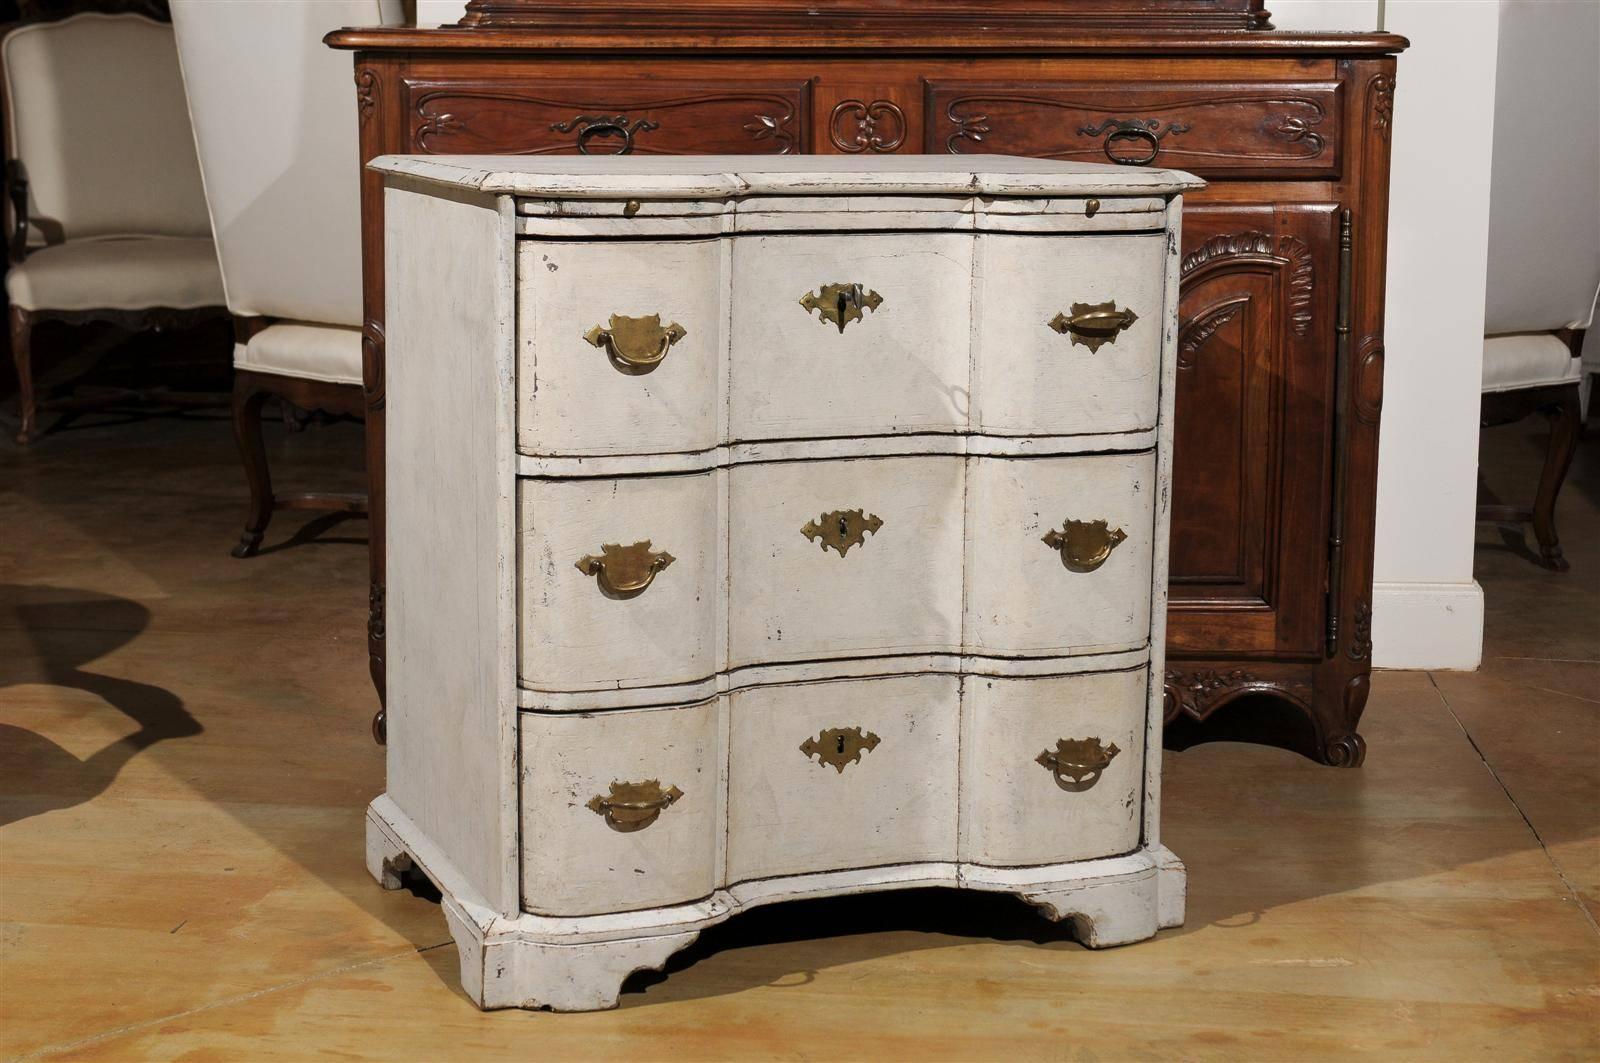 A Danish serpentine front three-drawer painted wood commode from the mid 18th century with pull-out shelf. This three-drawer commode was born in the 1760s in Denmark. Featuring a shaped top with beveled edges, a very thin pull-out drawer sits